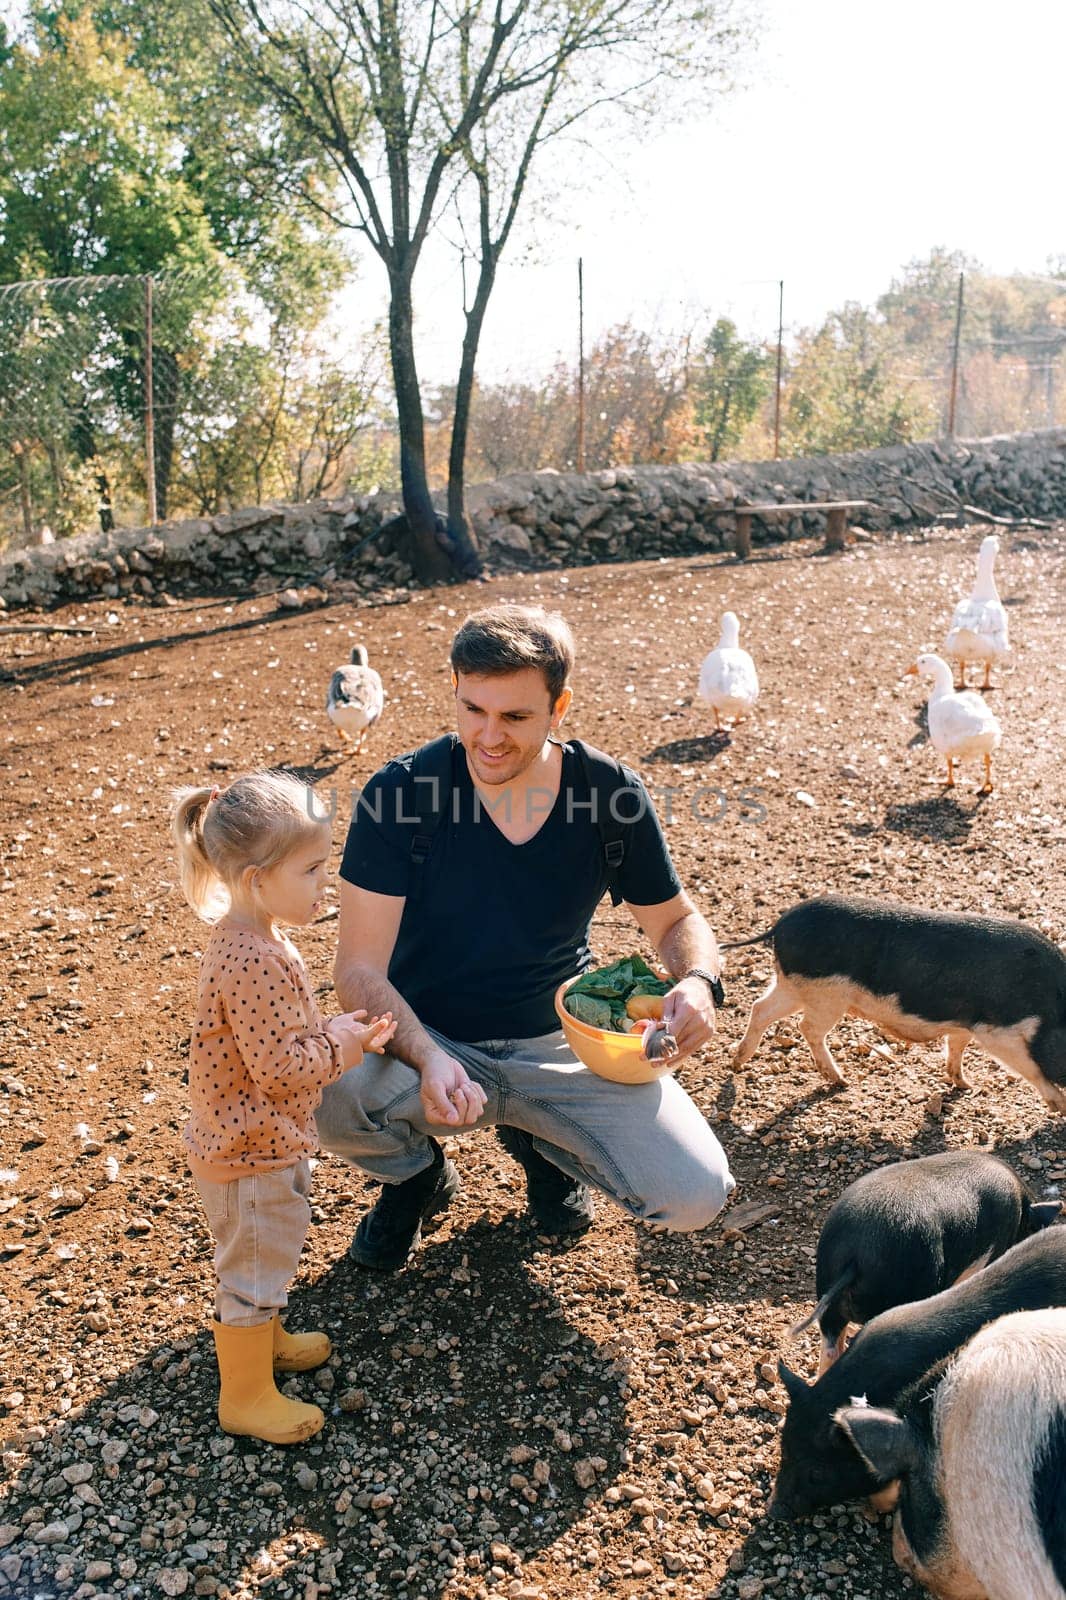 Dad squats near a little girl with a bowl and feeds fluffy piglets. High quality photo